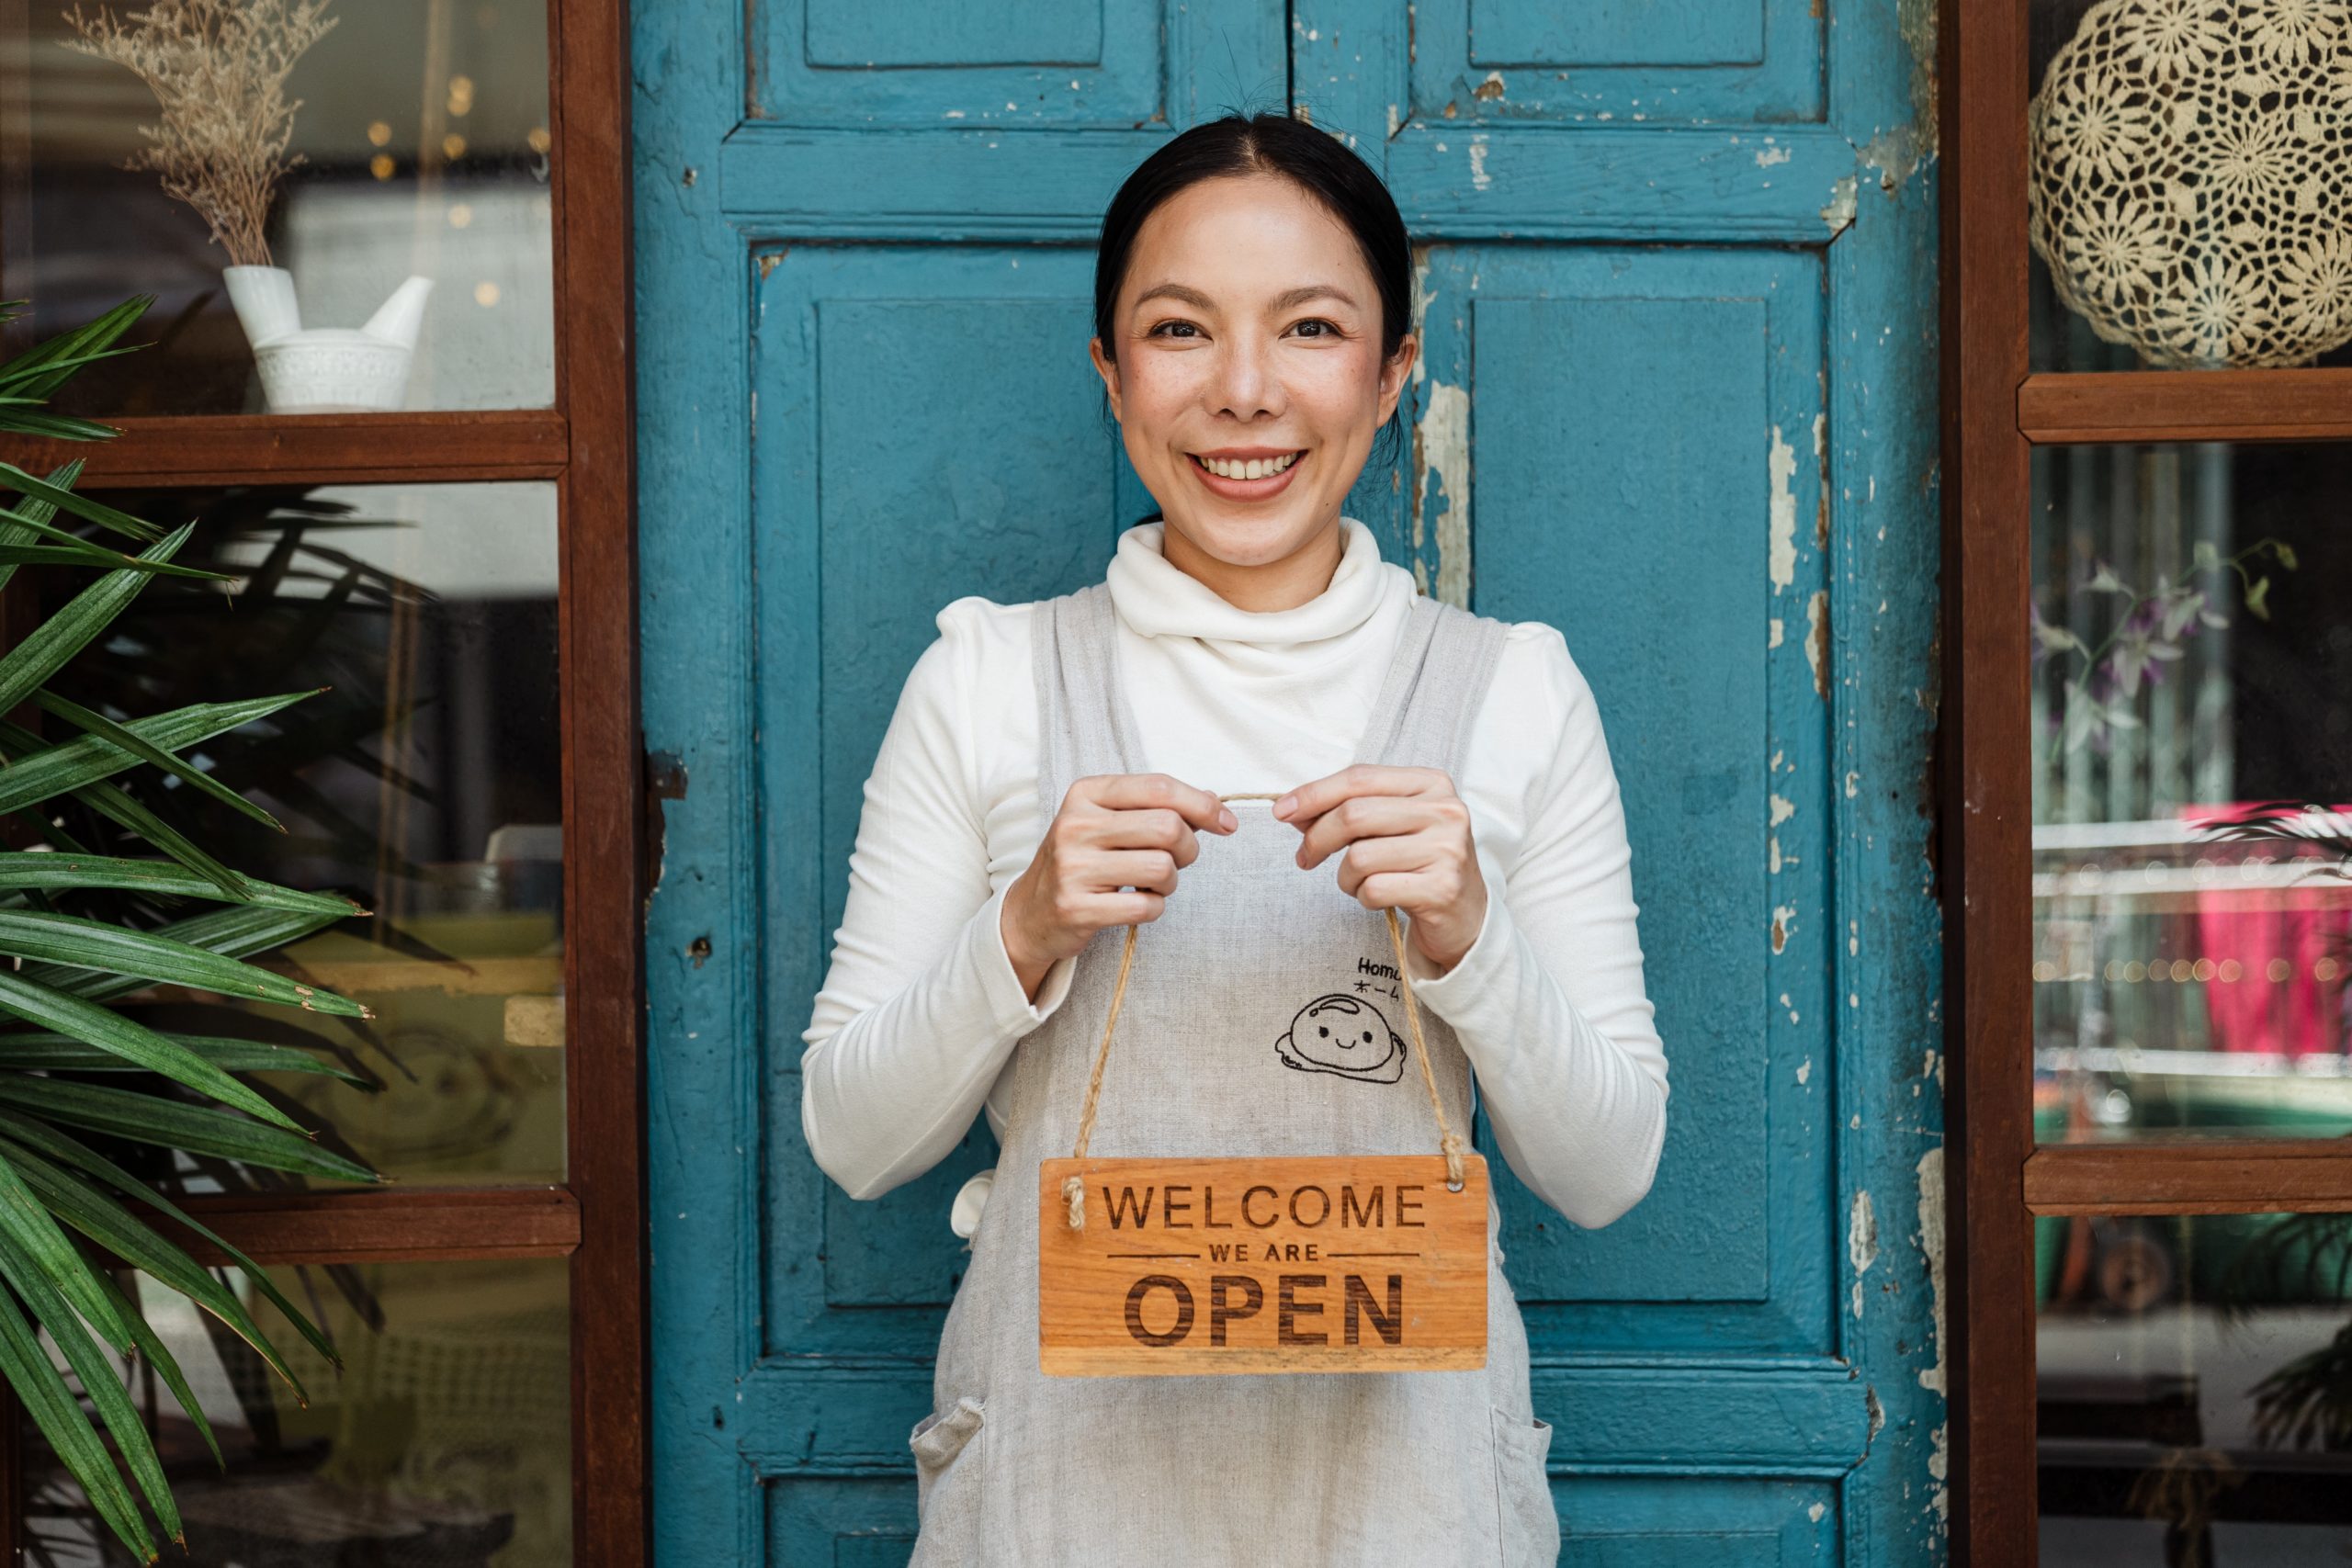 Woman holding welcome/open sign for her business.